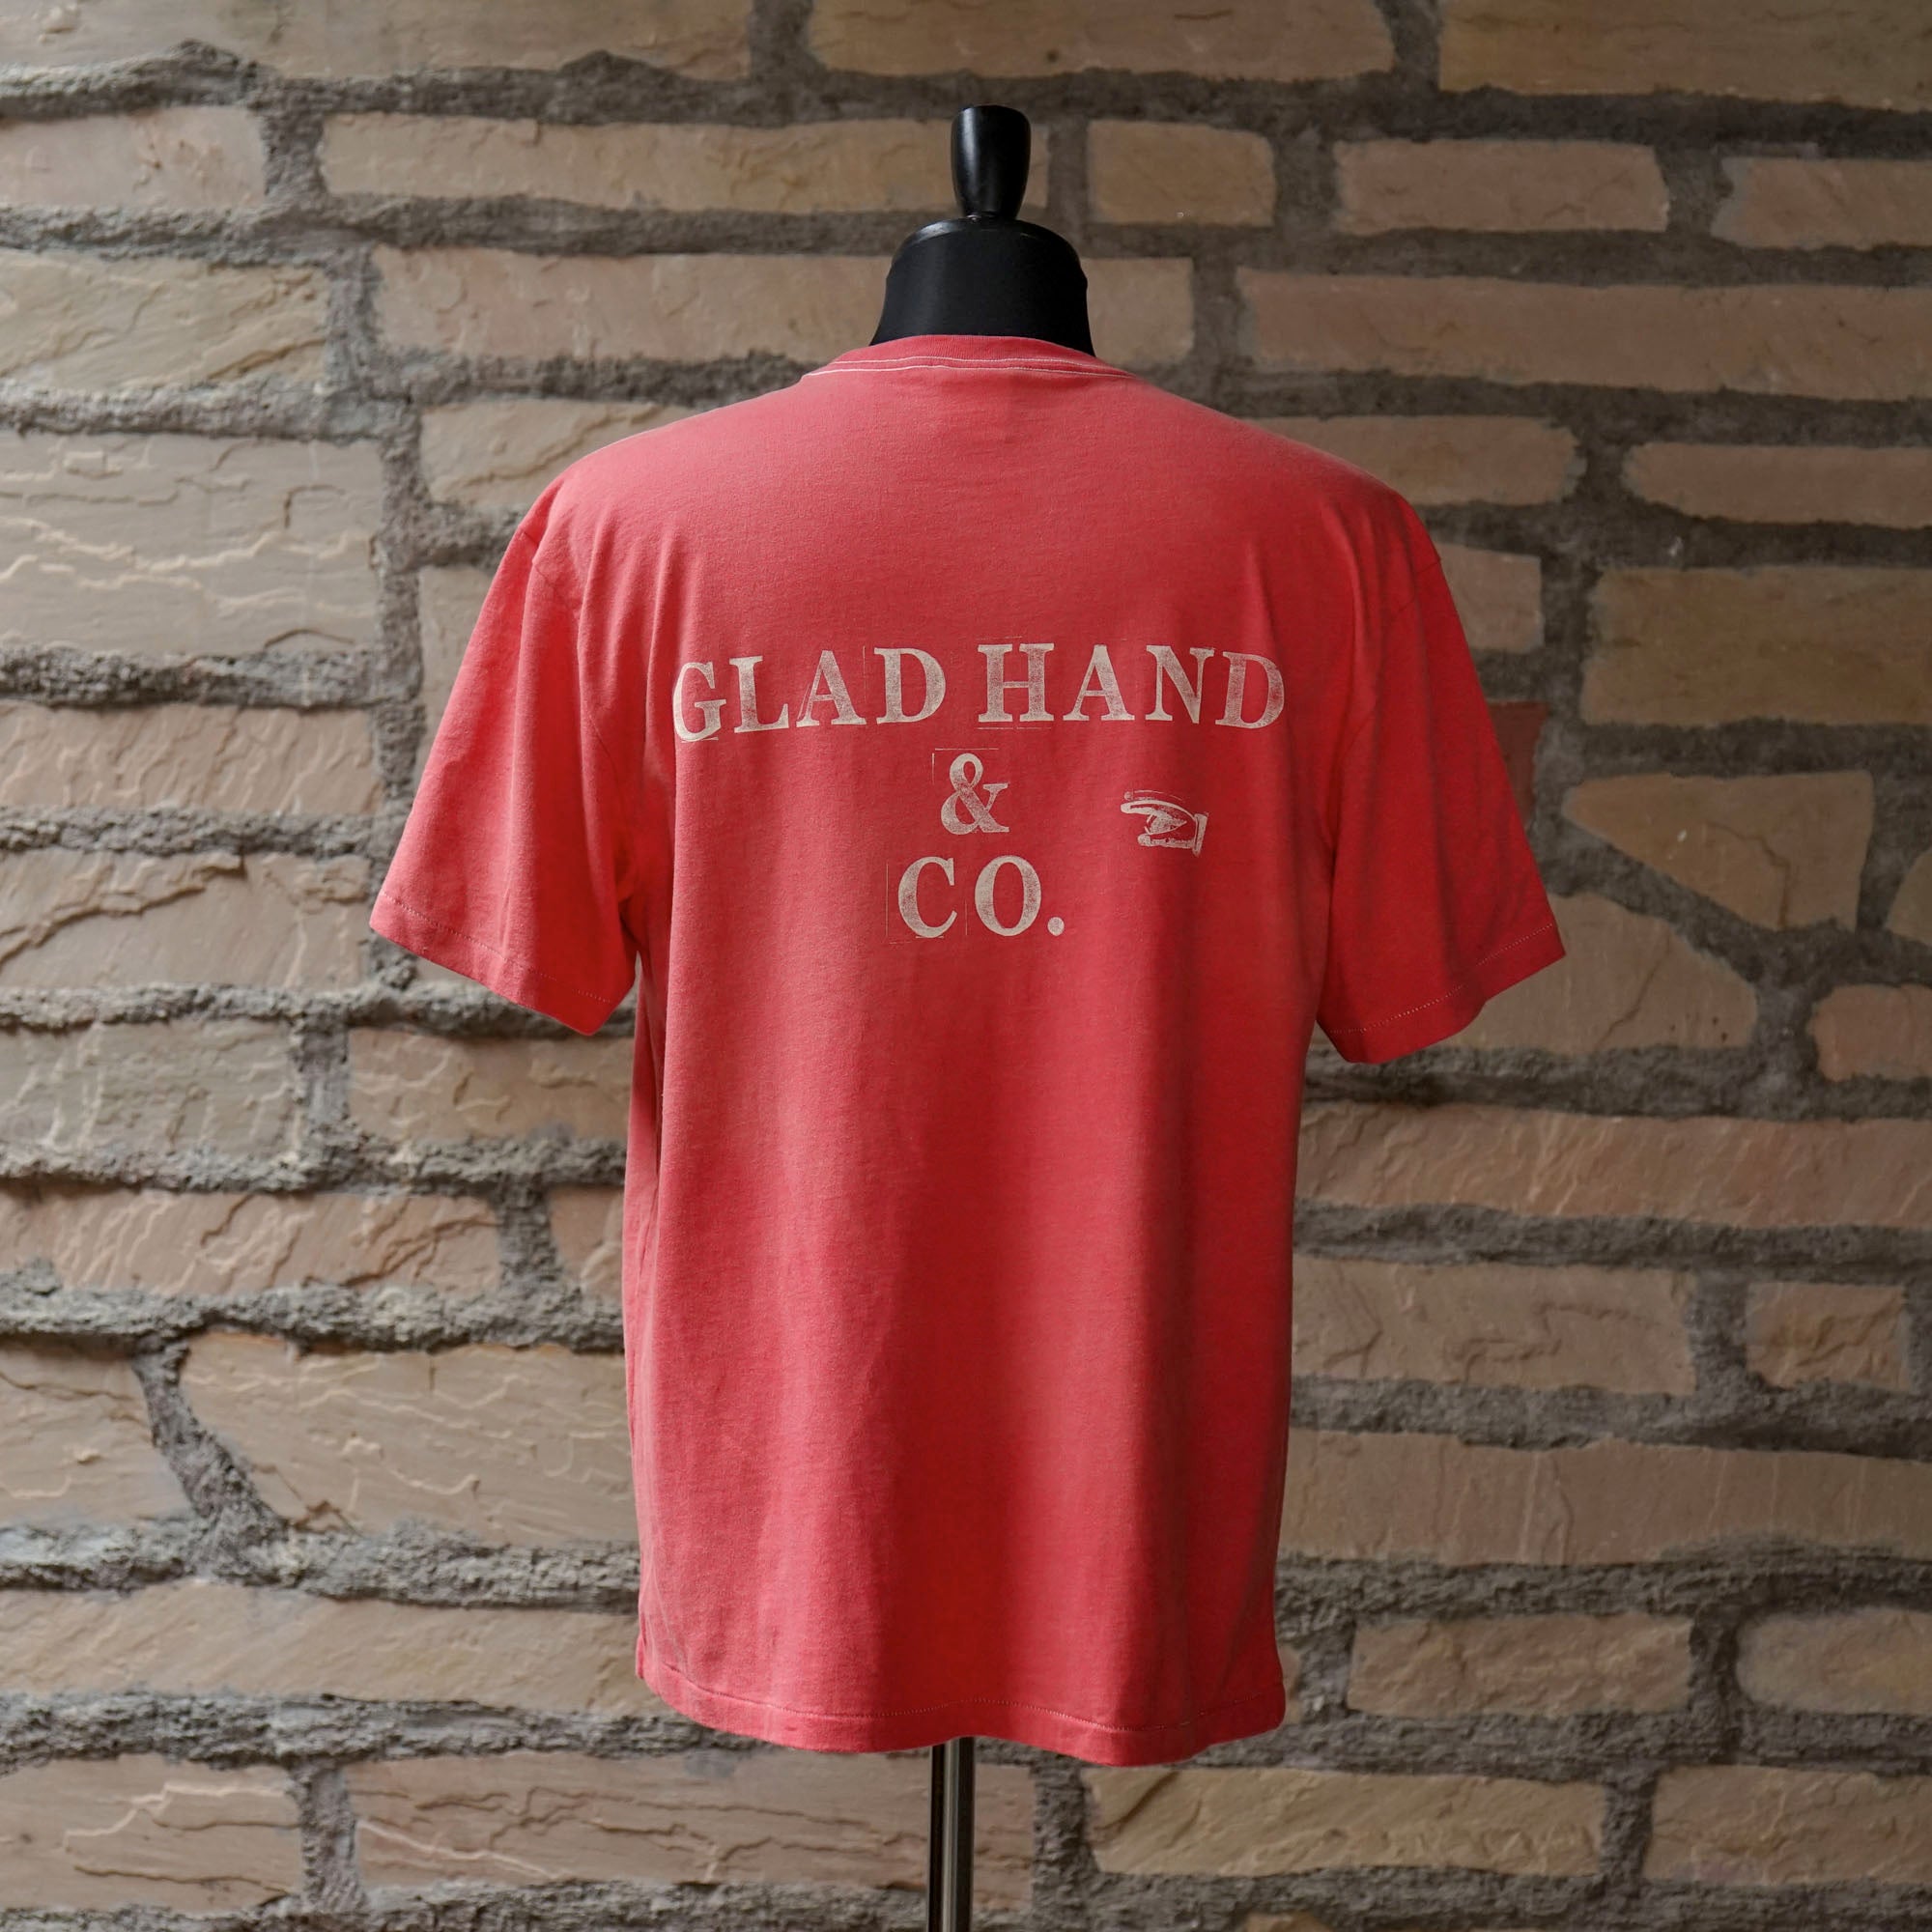 GLAD HAND & Co. Shop – GLADHAND & Co.